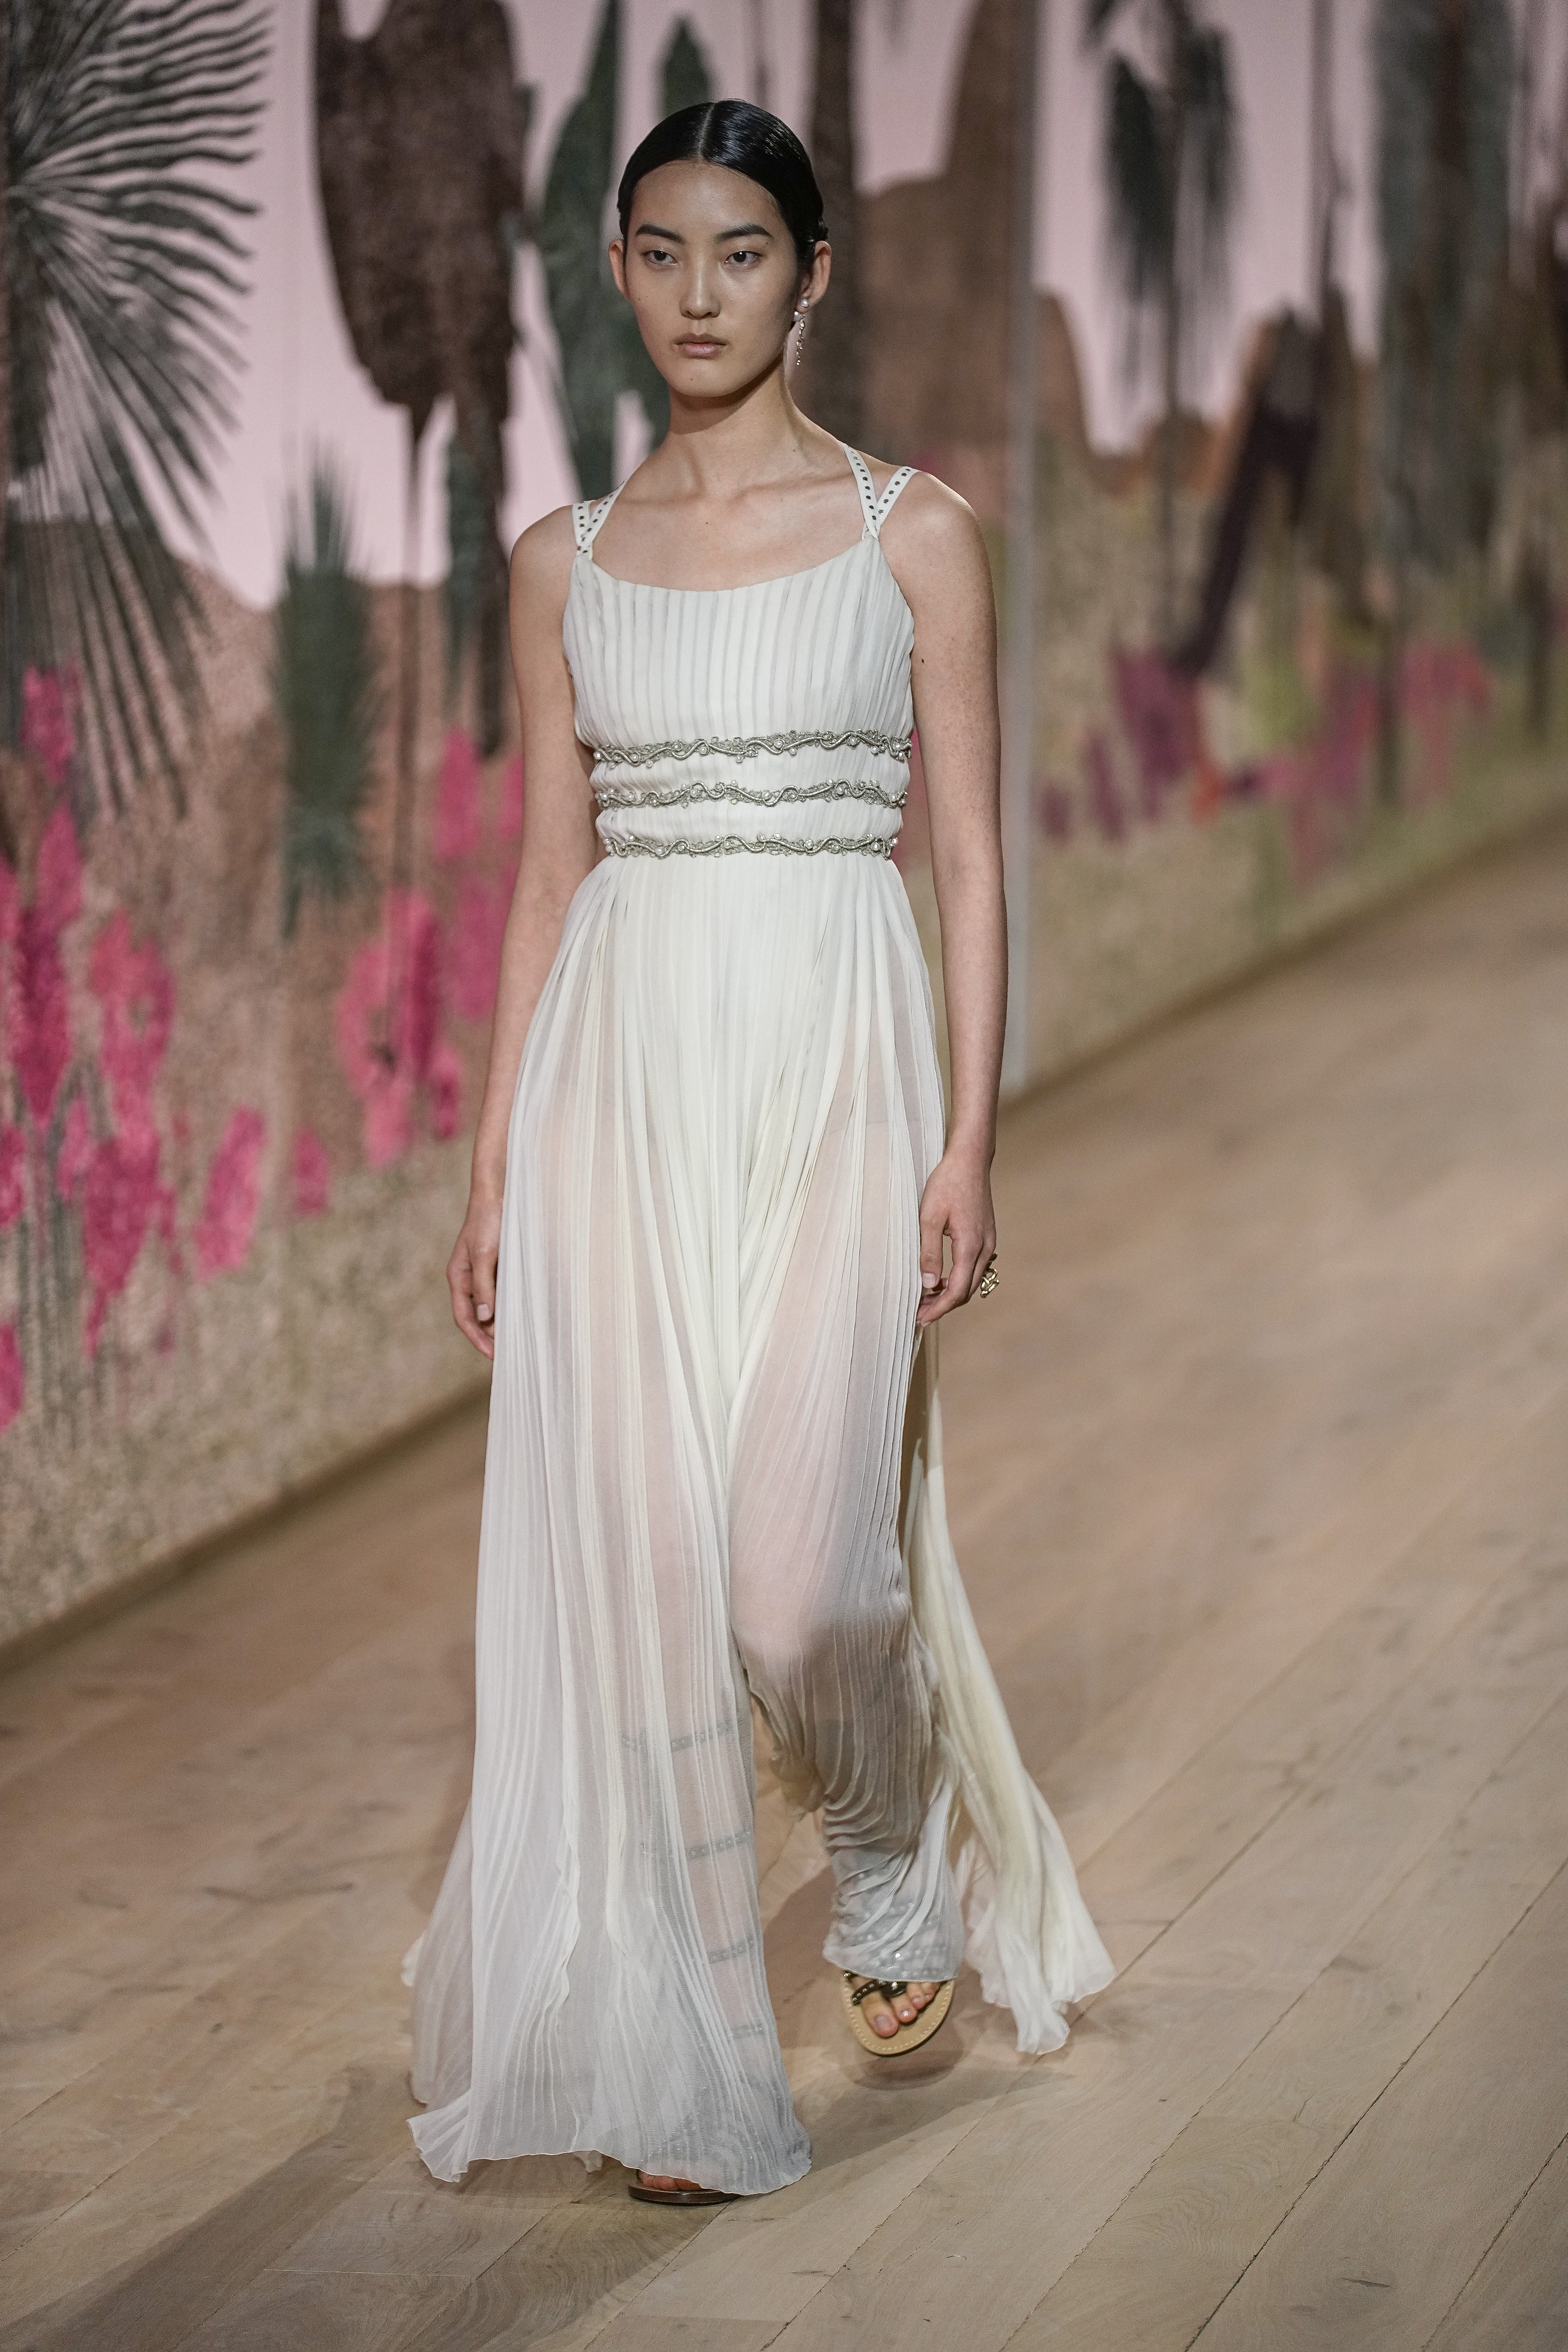 The Fantastical Dior Couture Show Which Brought the Outside In